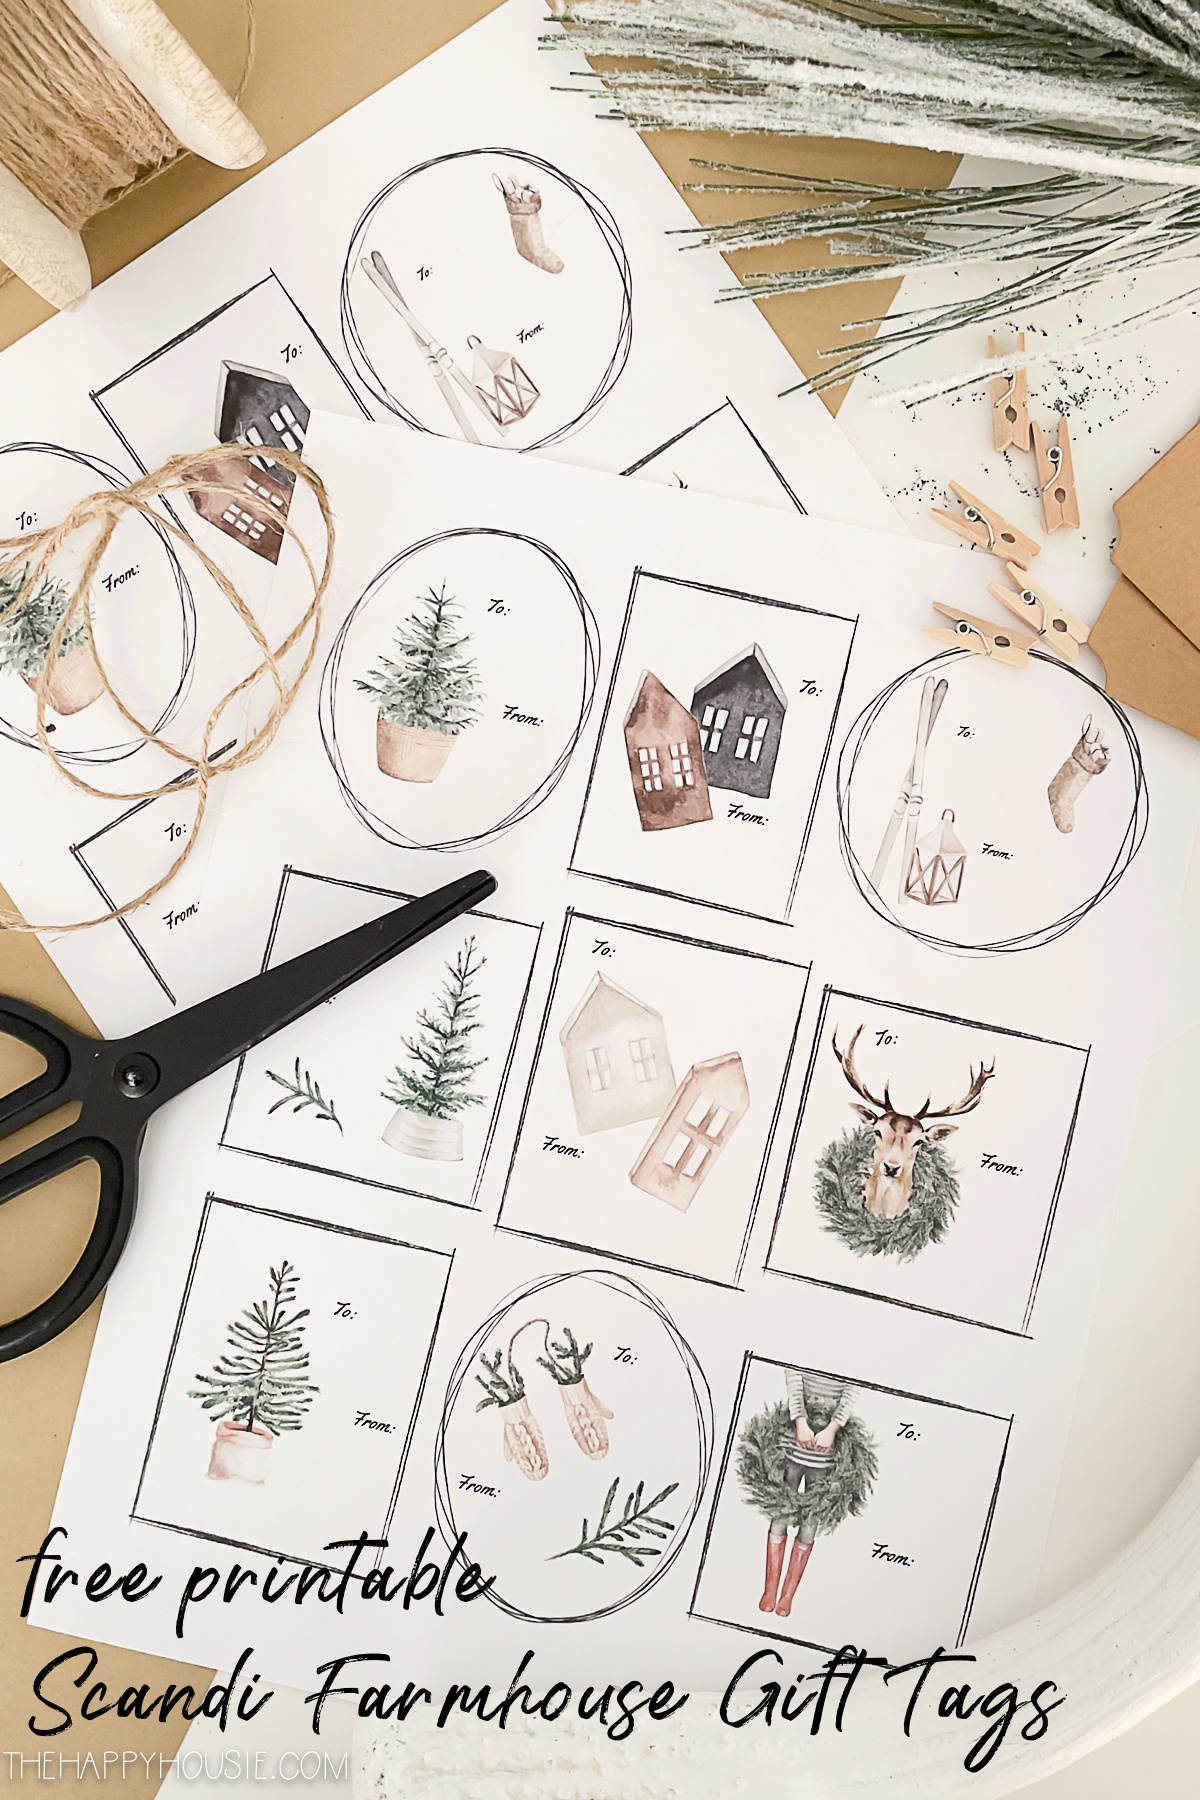 The free printable scandi farmhouse gift tags and scissors on the table.